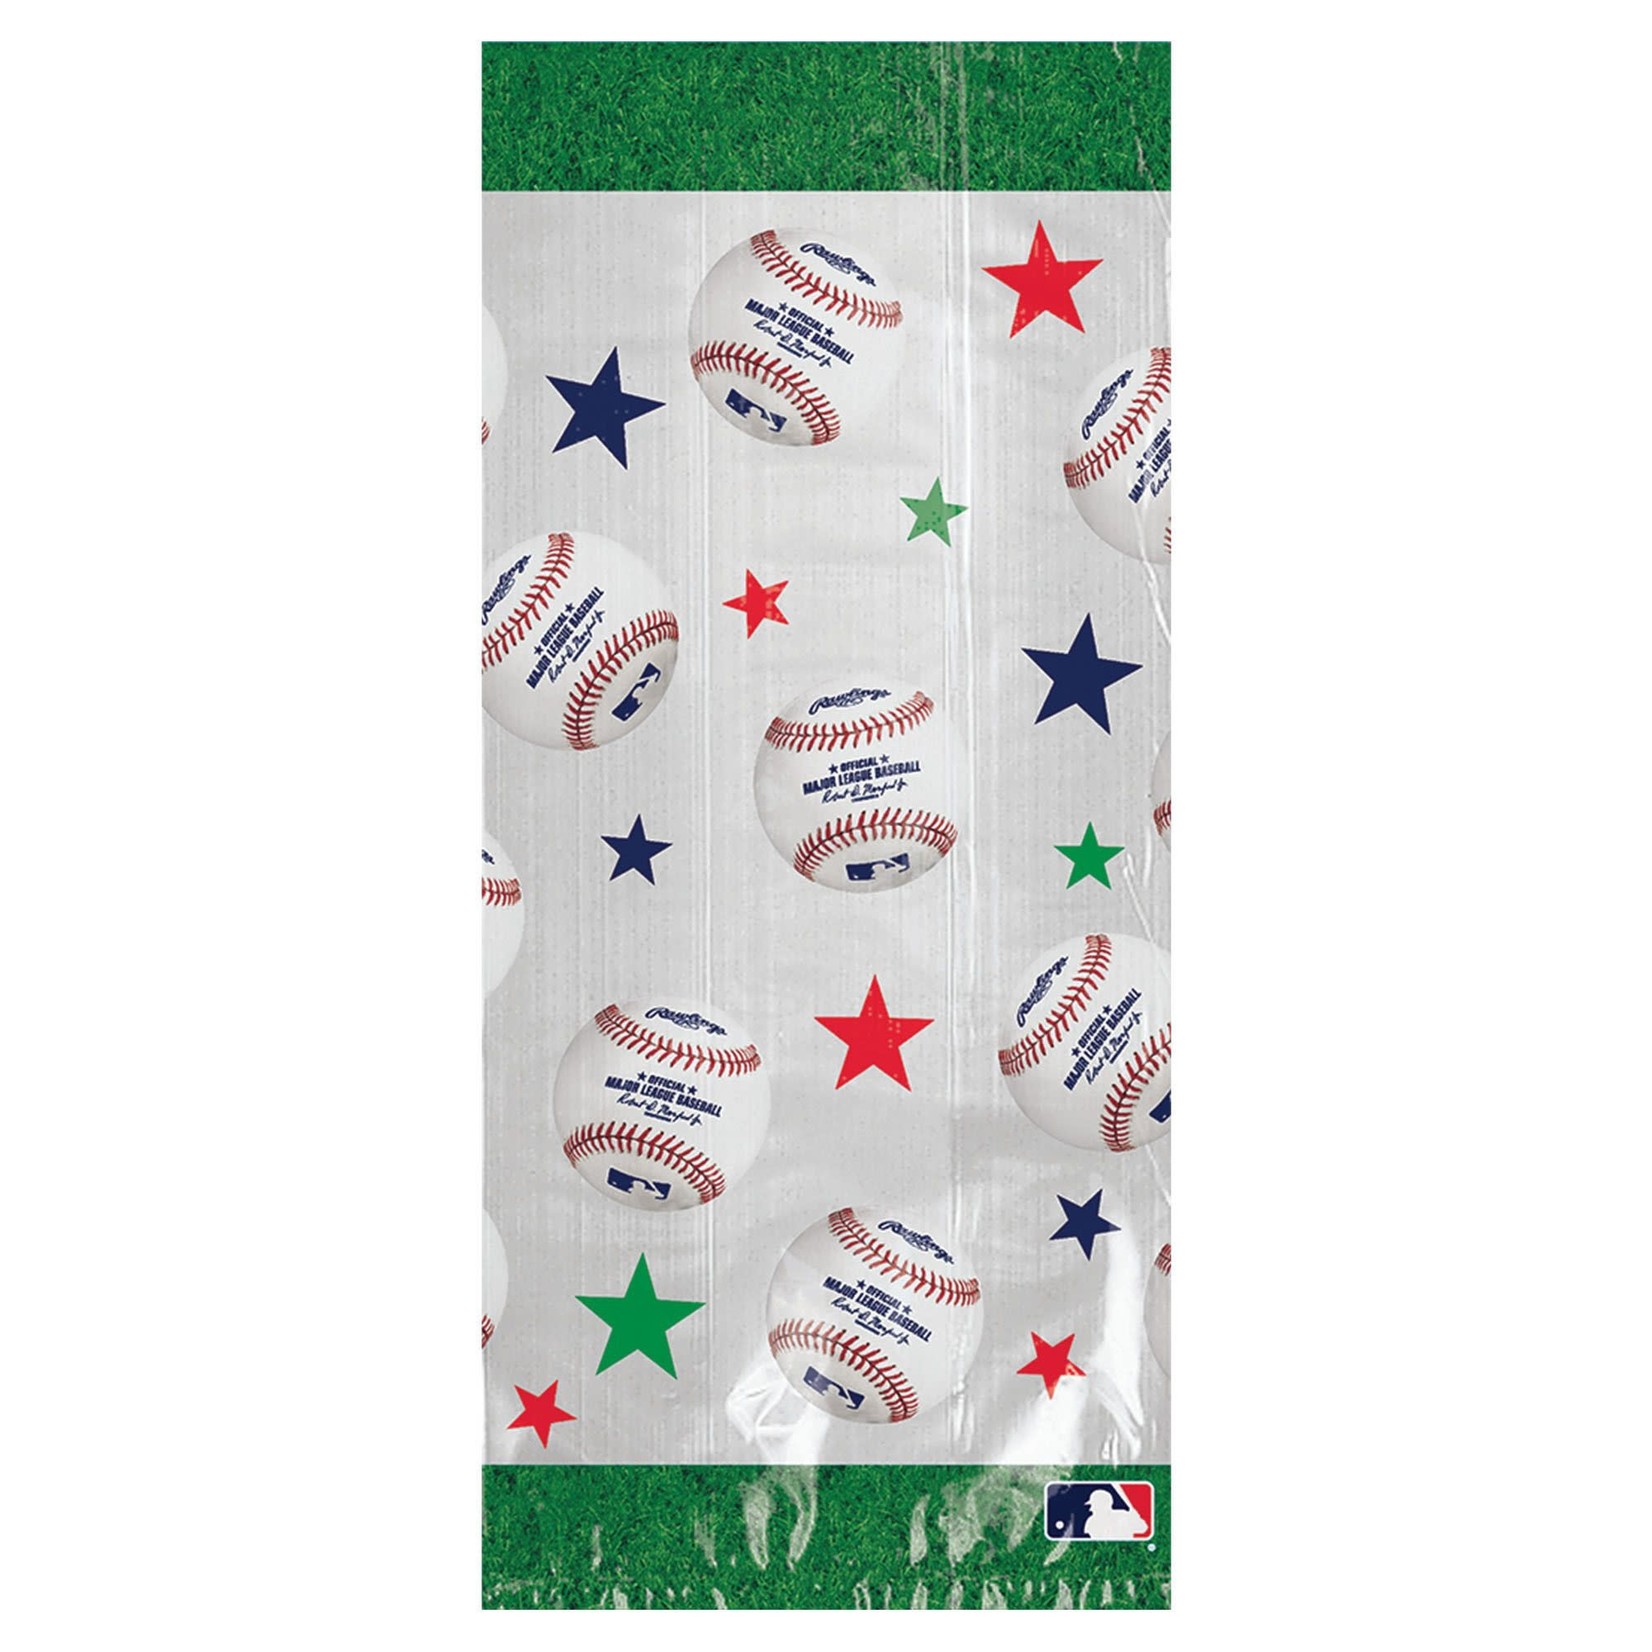 Baseball Party Bags 20ct